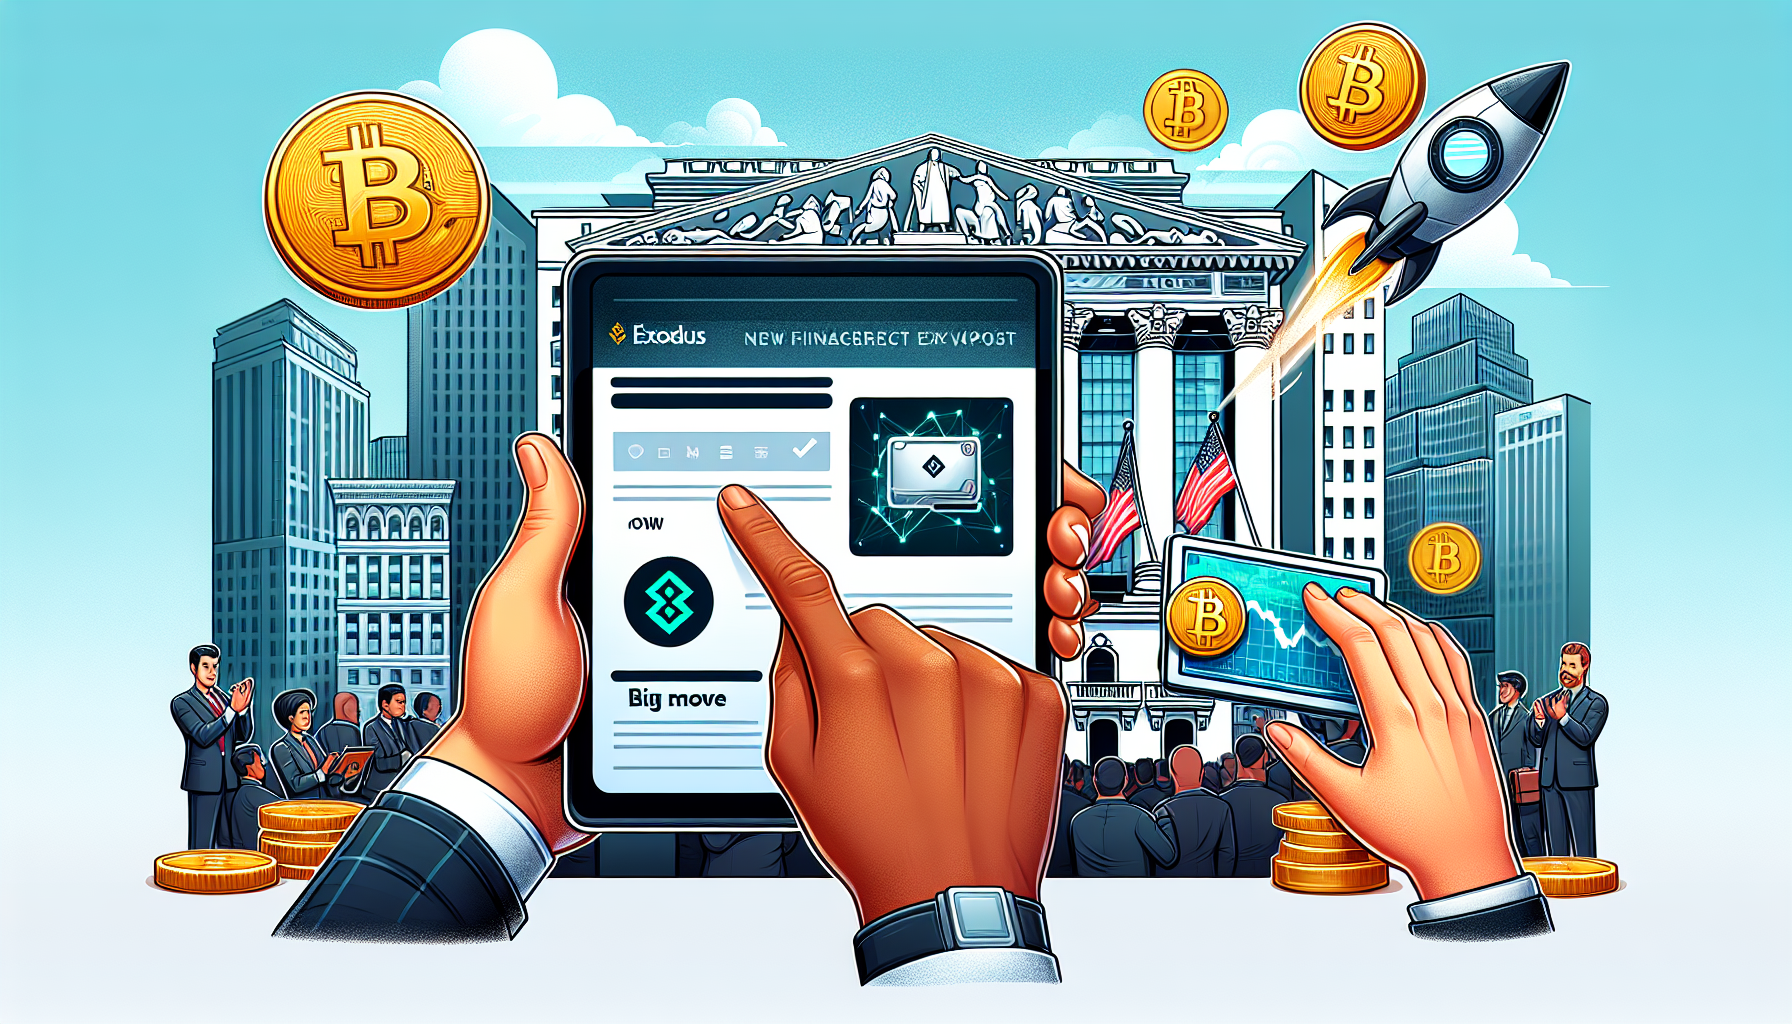 Big Move: Your Favorite Bitcoin Wallet, Exodus, Hits the New York Stock Exchange – Click to See What This Means for You!